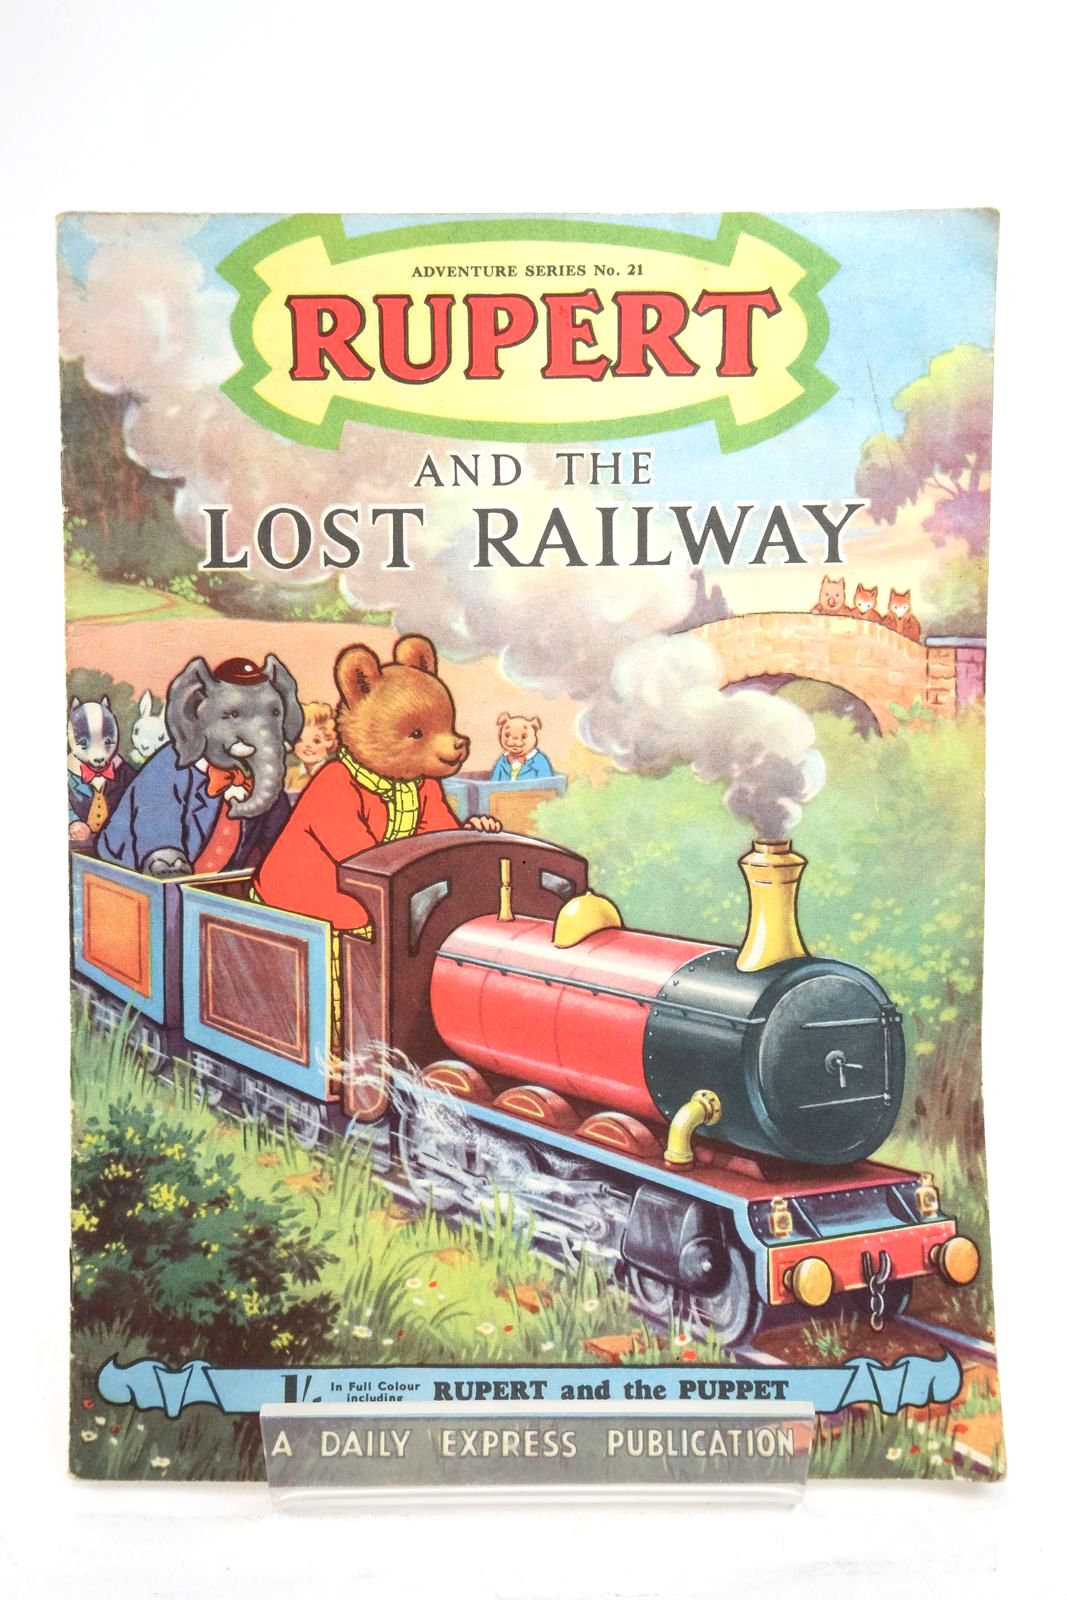 Photo of RUPERT ADVENTURE SERIES No. 21 - RUPERT AND THE LOST RAILWAY written by Bestall, Alfred published by Daily Express (STOCK CODE: 2137193)  for sale by Stella & Rose's Books